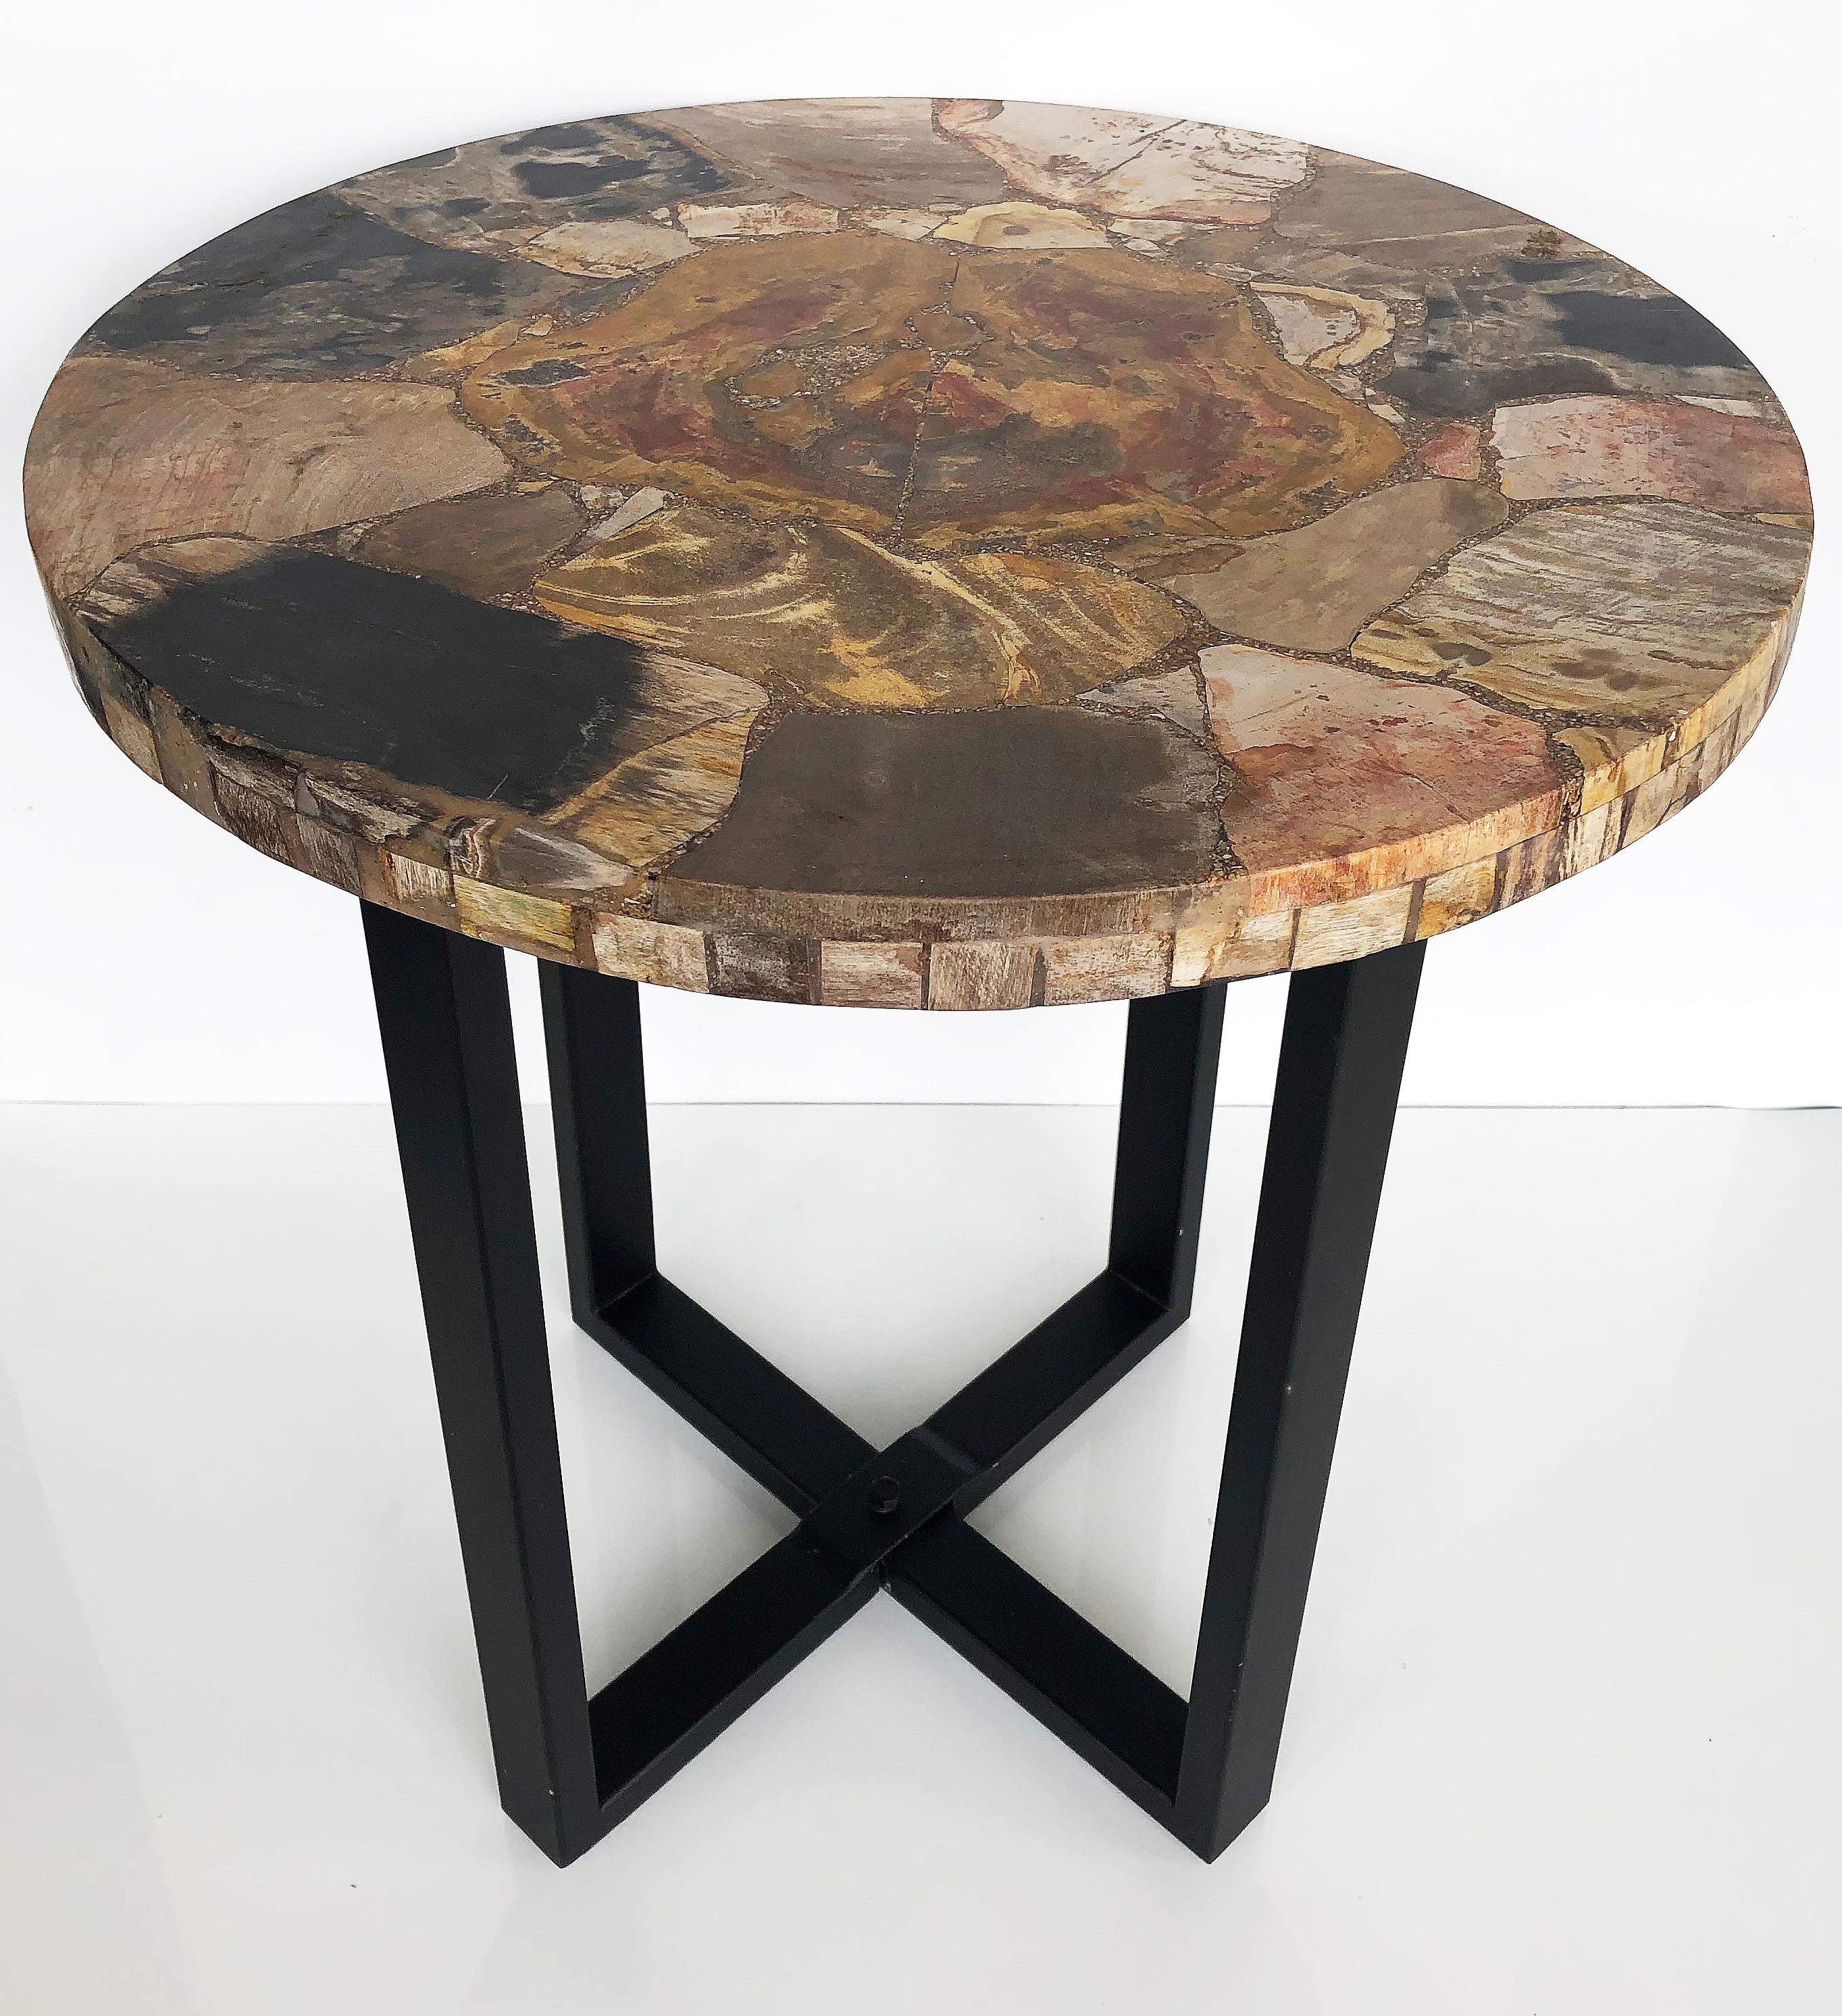 Vintage petrified wood side table on a metal base

Offered is a round petrified wood side table with tesselated edging supported by a cross stretcher metal base. The top is made in Thailand incorporating petrified wood and other specimens as